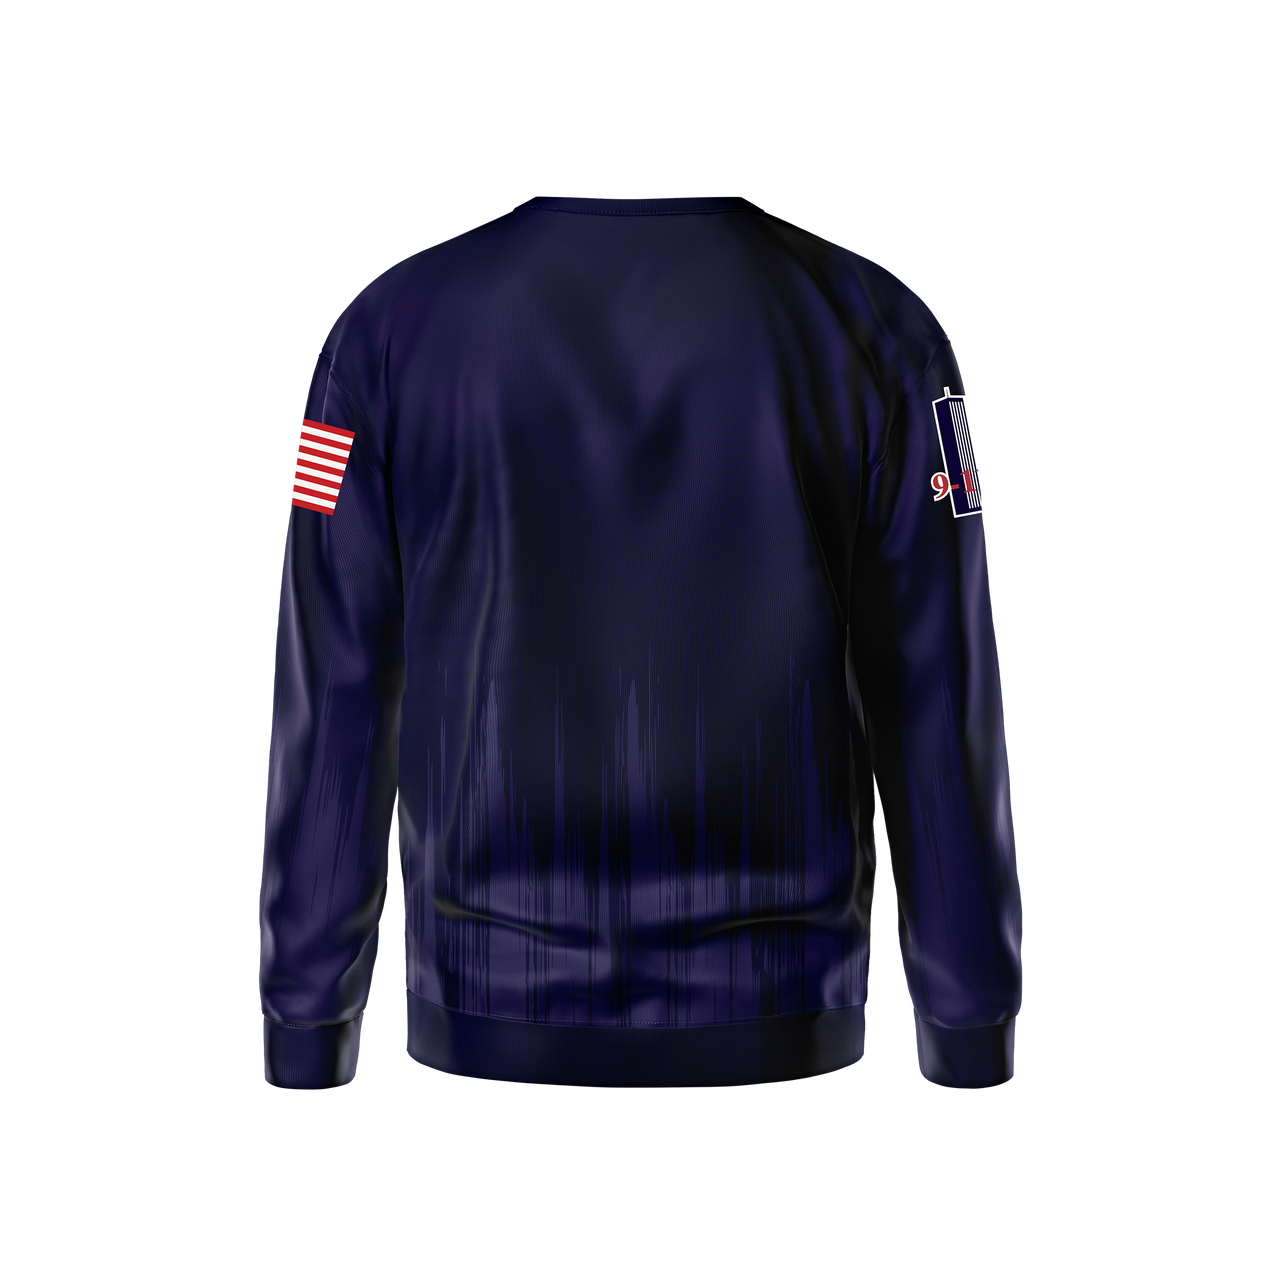 FDNY Rugby Contact Jacket